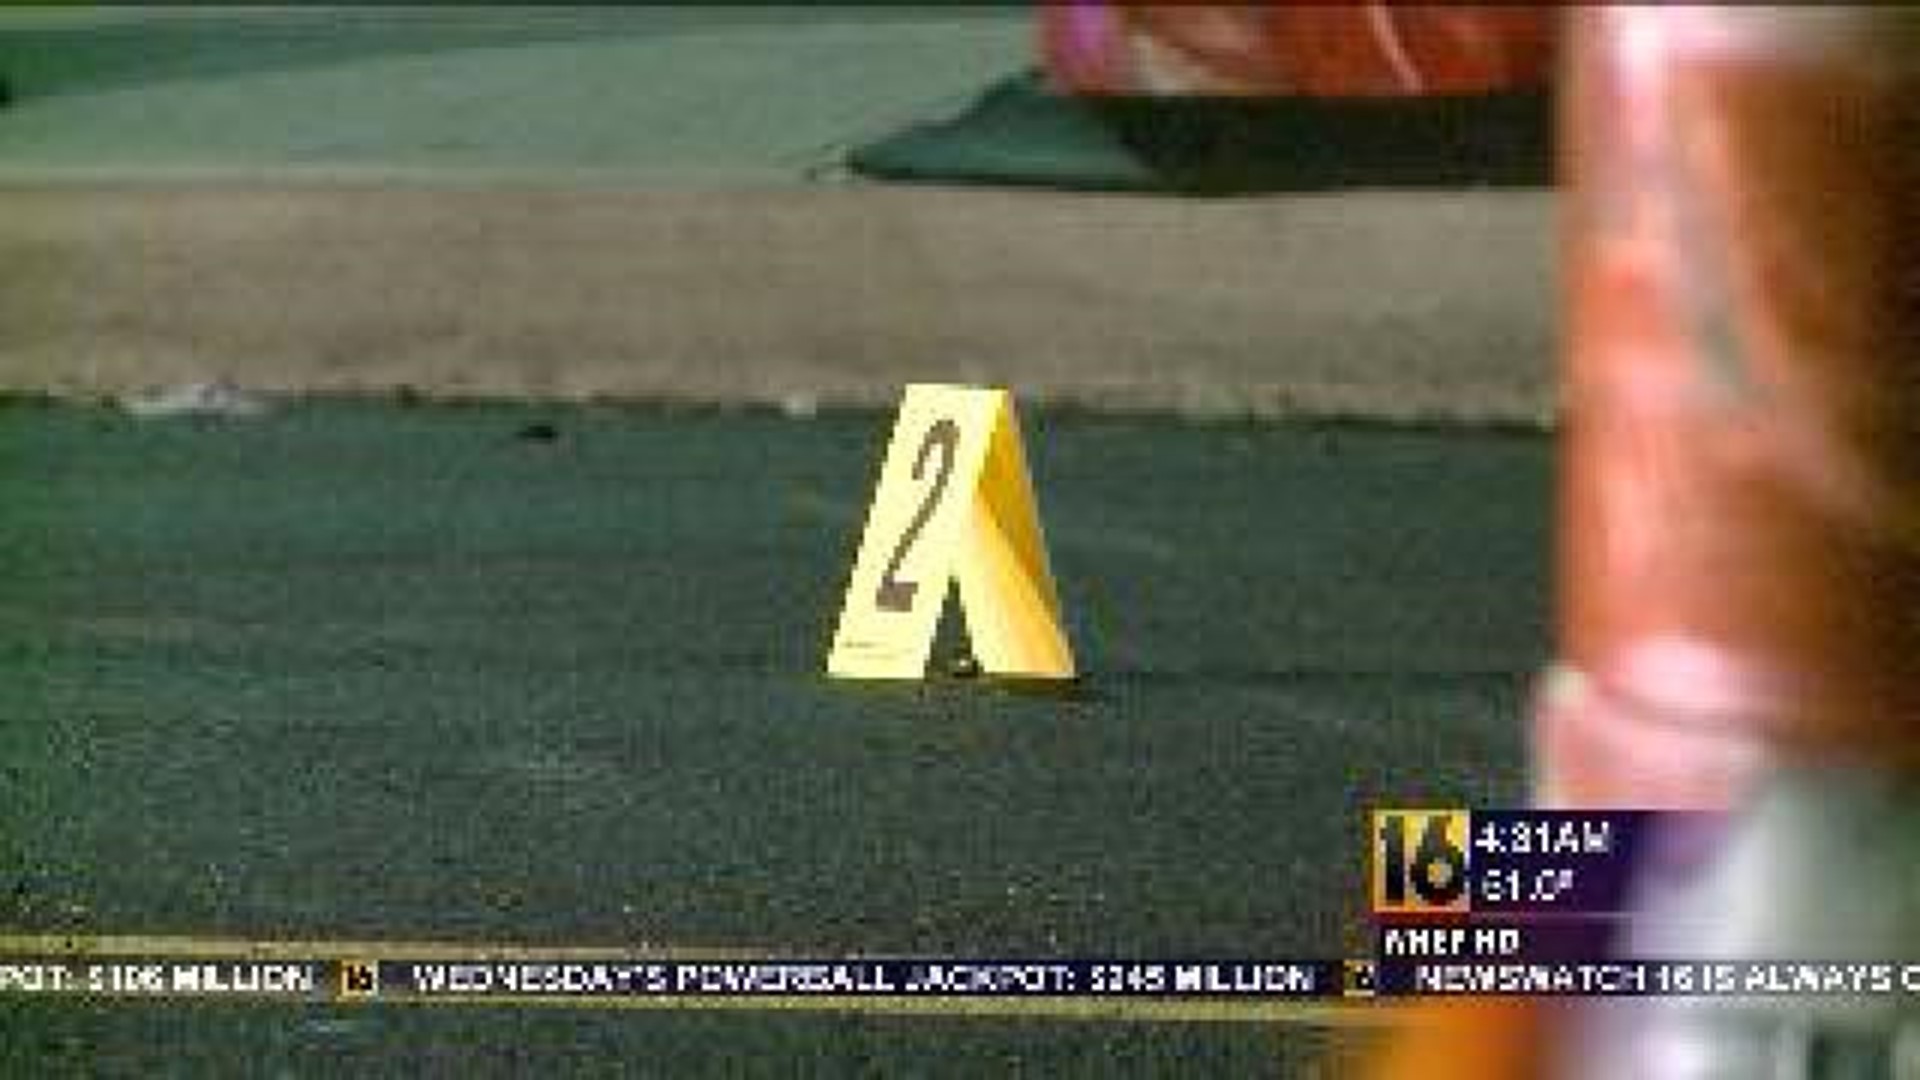 Man Hospitalized After Shooting